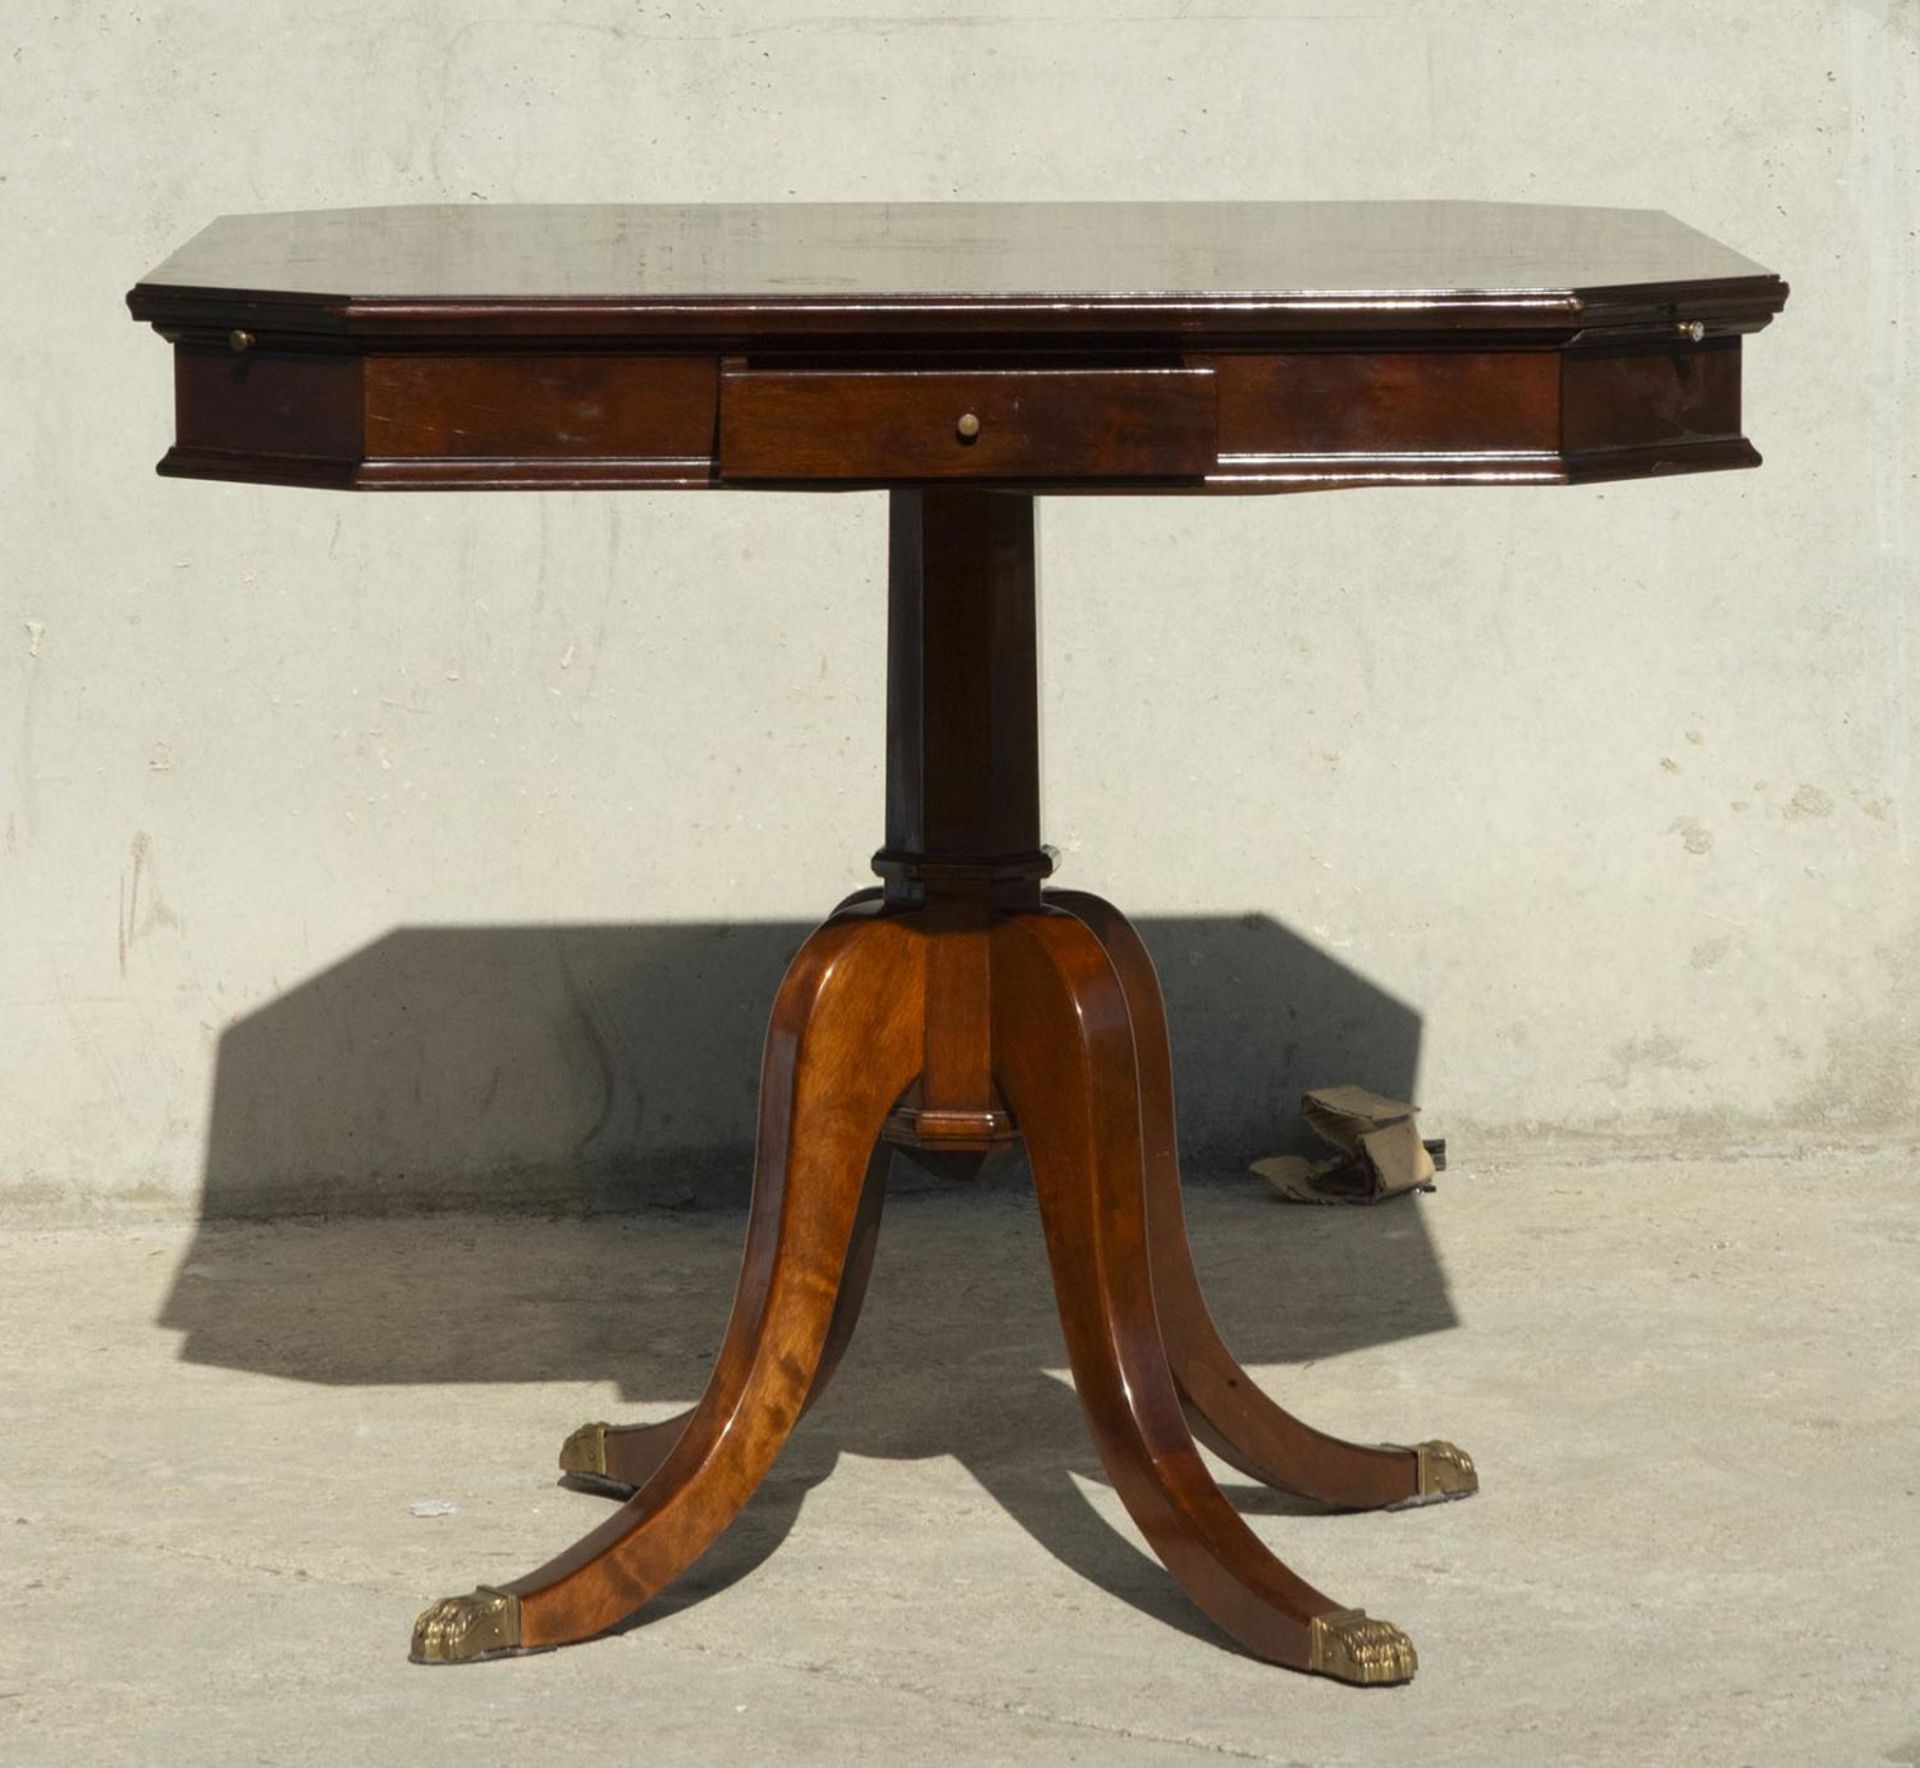 Elegant set of Table with Four Chairs in solid Mahogany palm in Gustavian style, 19th - 20th century - Bild 2 aus 4